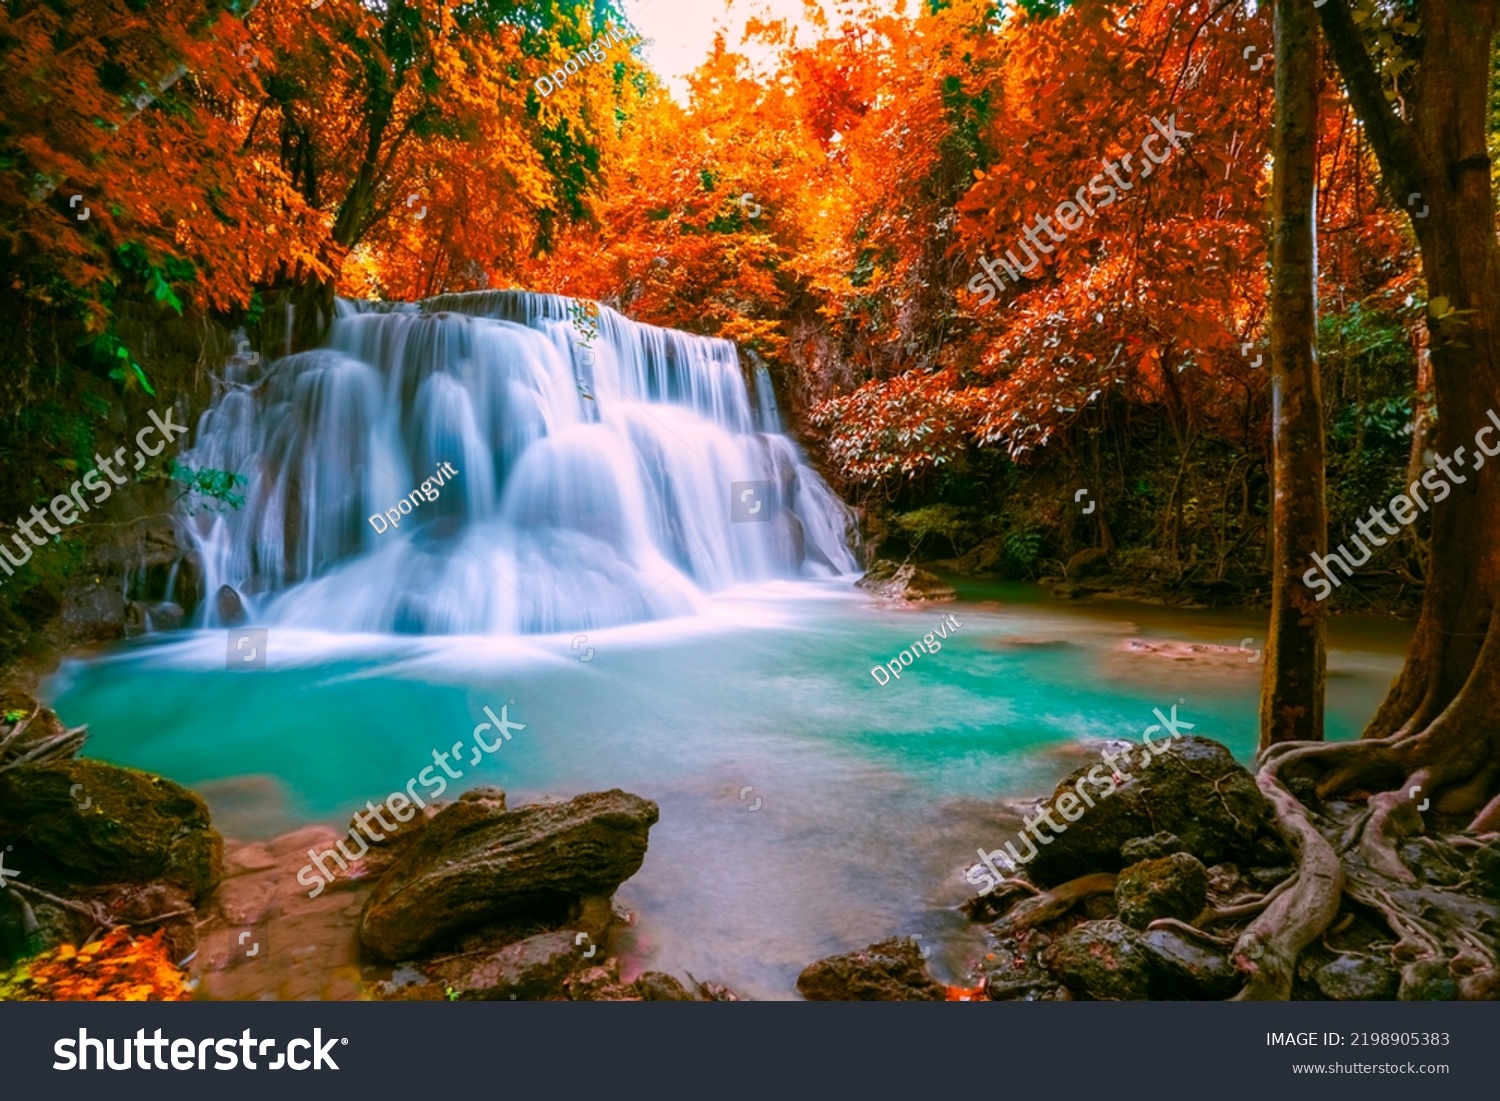 Huai Mae Khamin waterfall at Kanchanaburi Thailand, Hot Springs Onsen Natural Bath is Surrounded by red-yellow leaves. In fall leaves, Waterfall among many foliages, In fall leaves Leaf color change, #2198905383